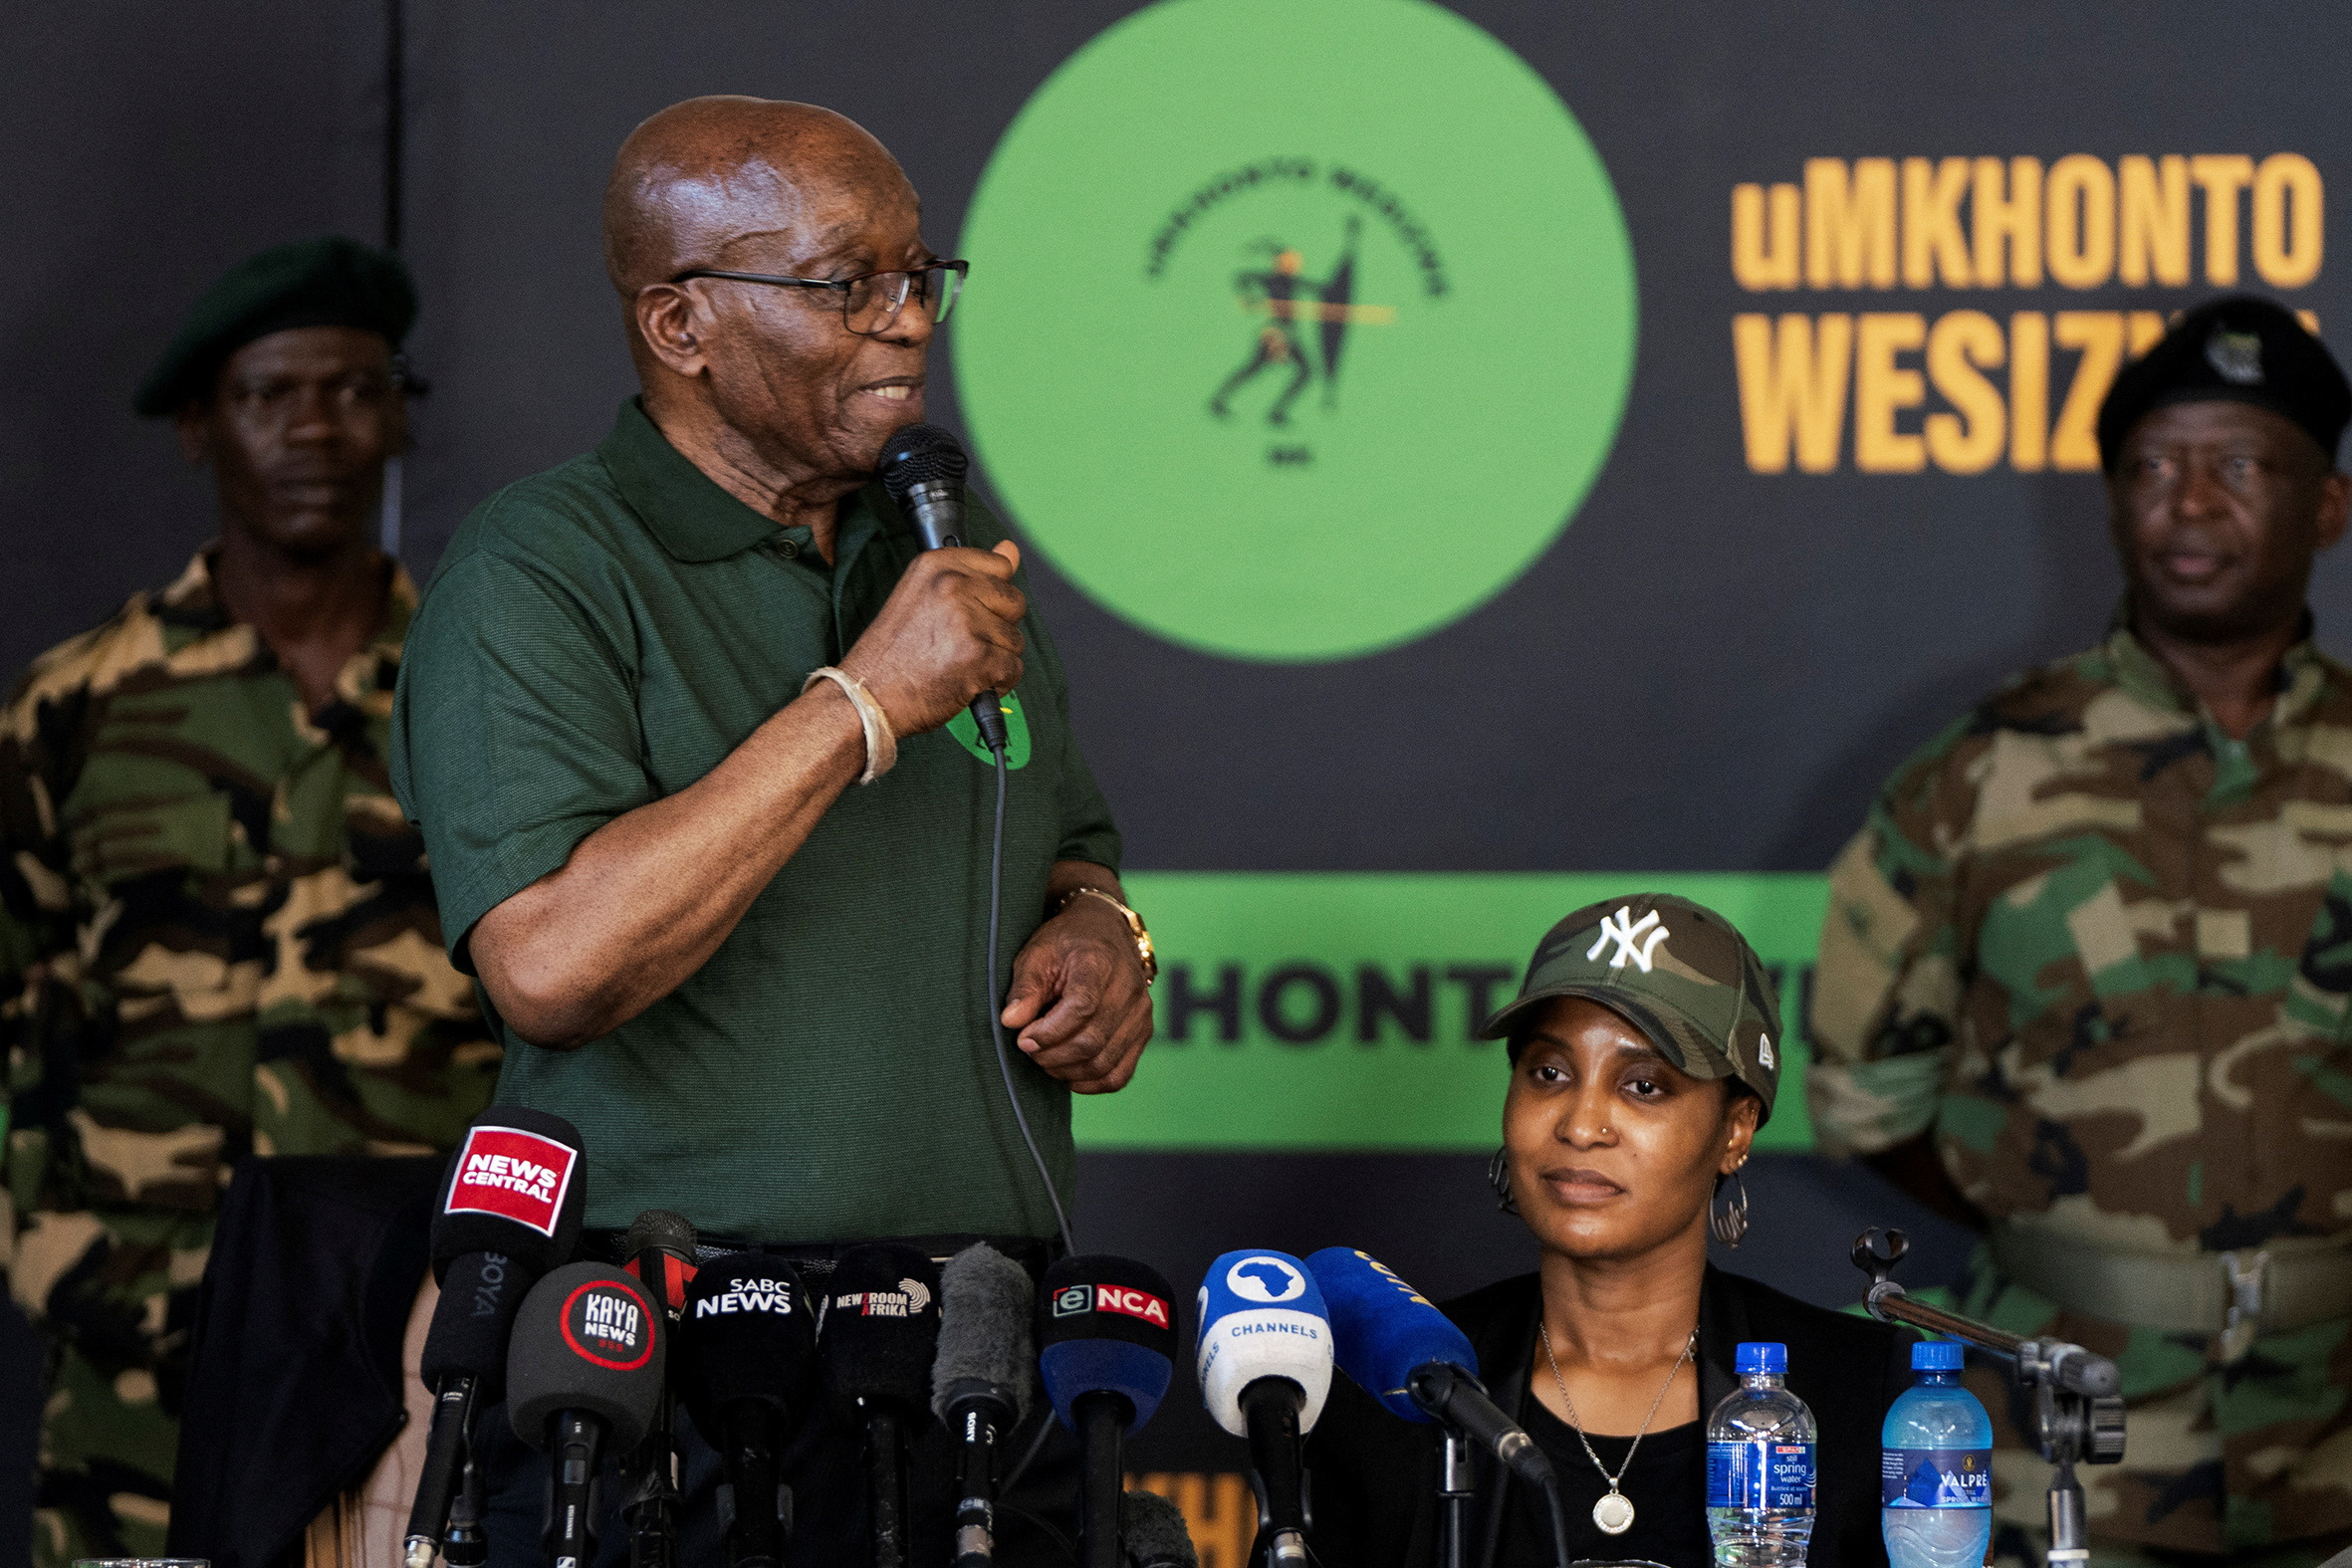 Zuma says he will not vote for ANC in South Africa's election